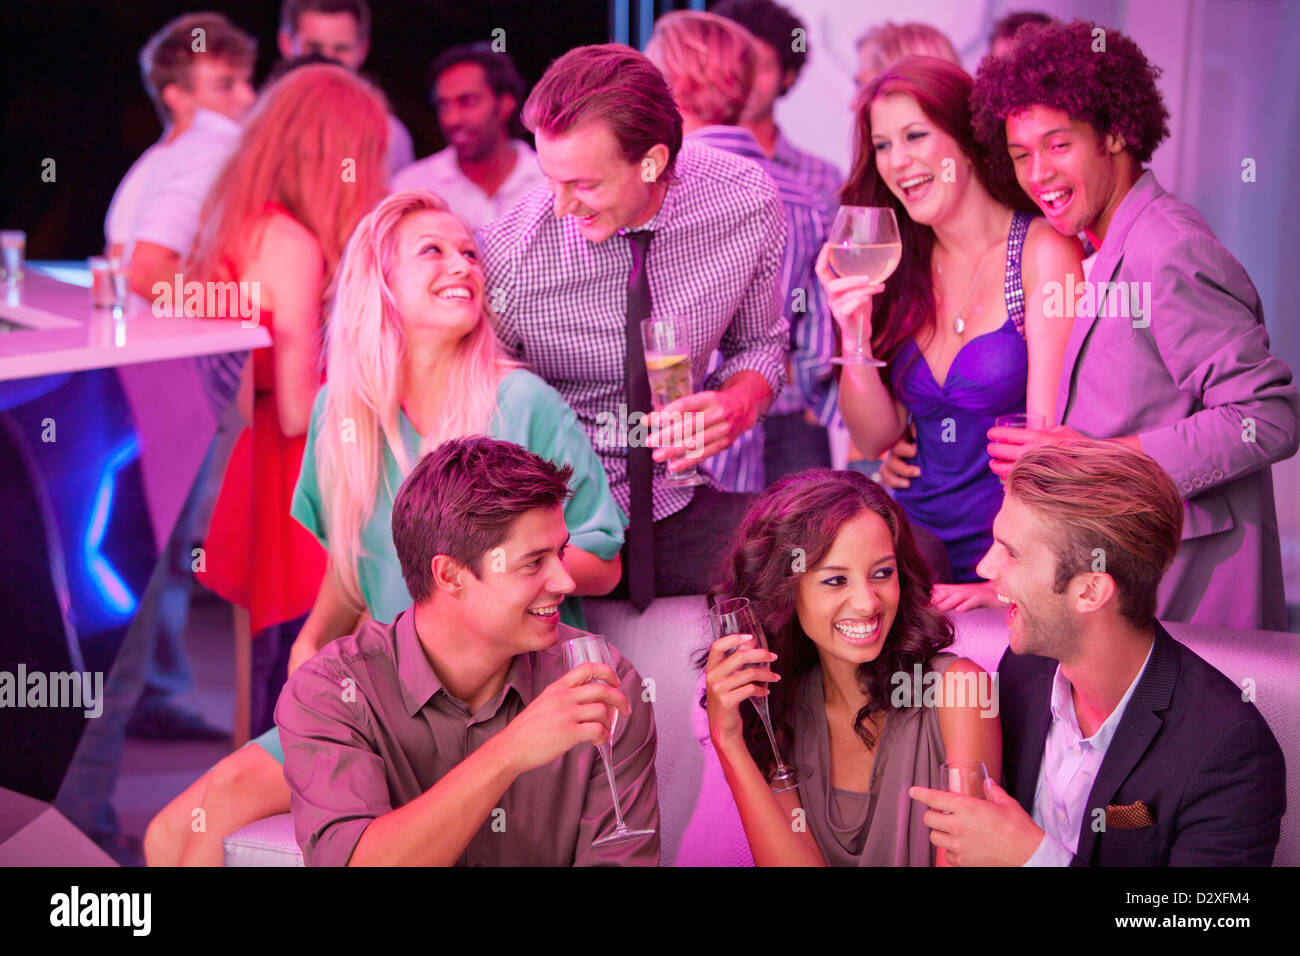 Smiling friends drinking champagne in nightclub Banque D'Images